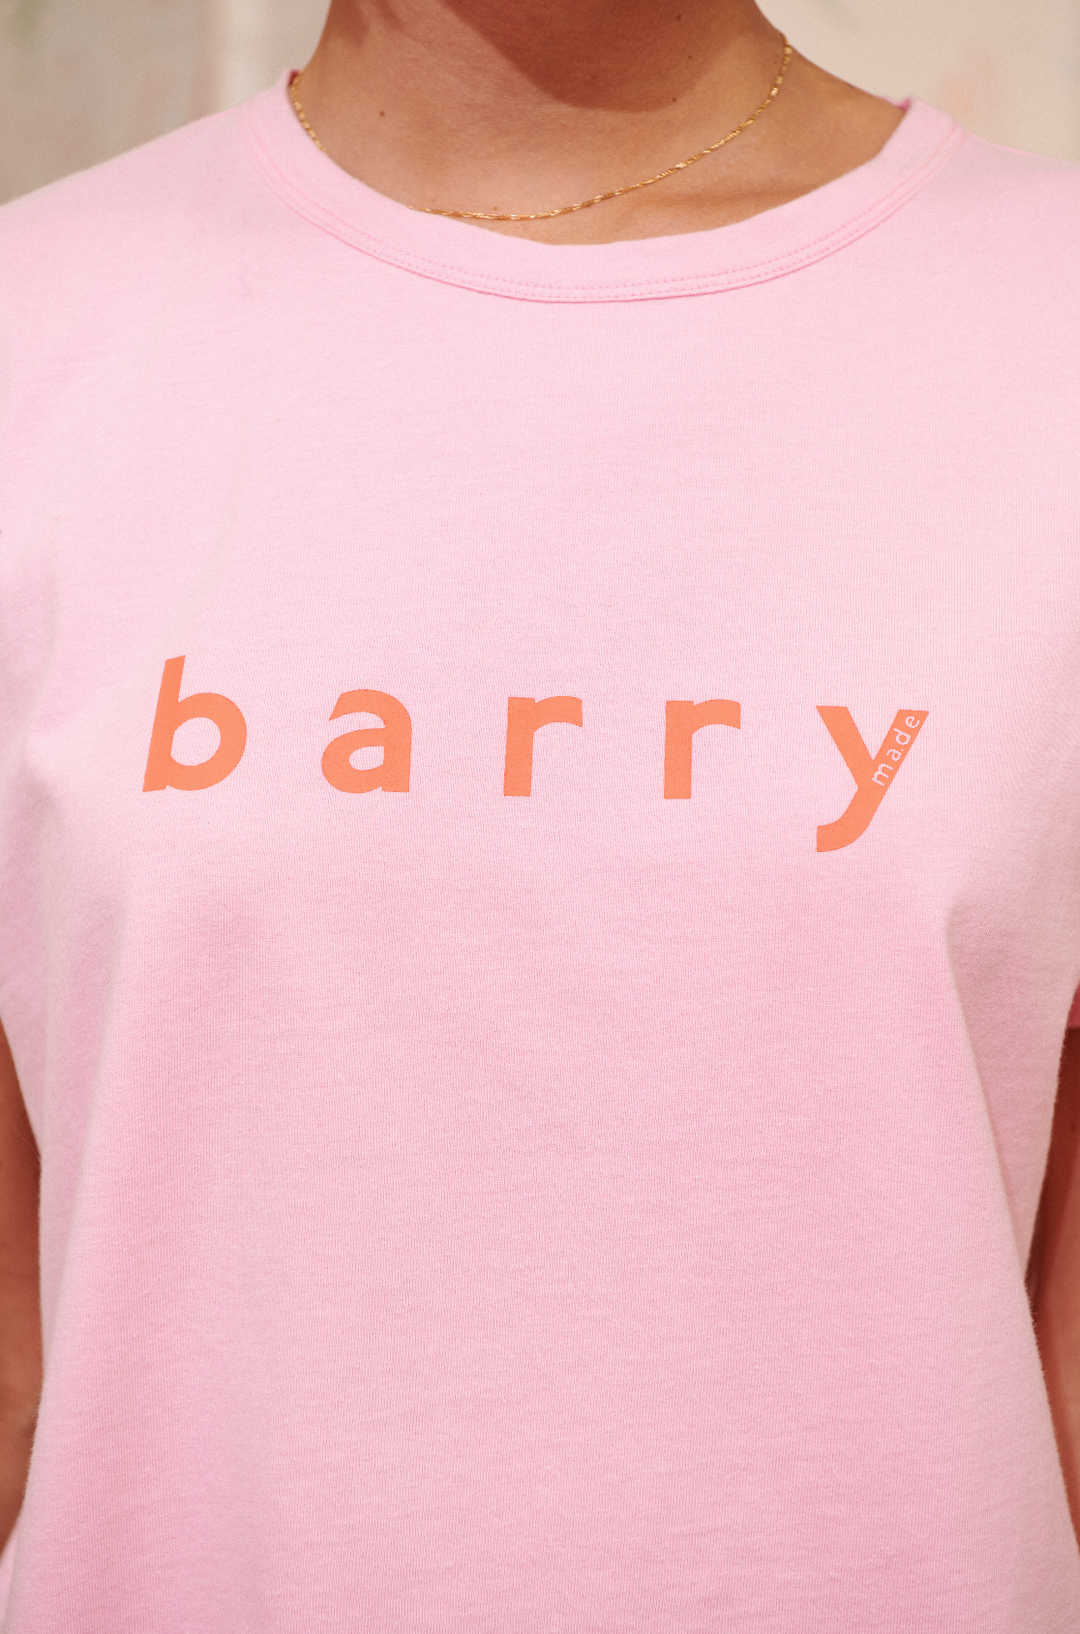 Barry Made Barry Tee - Pink